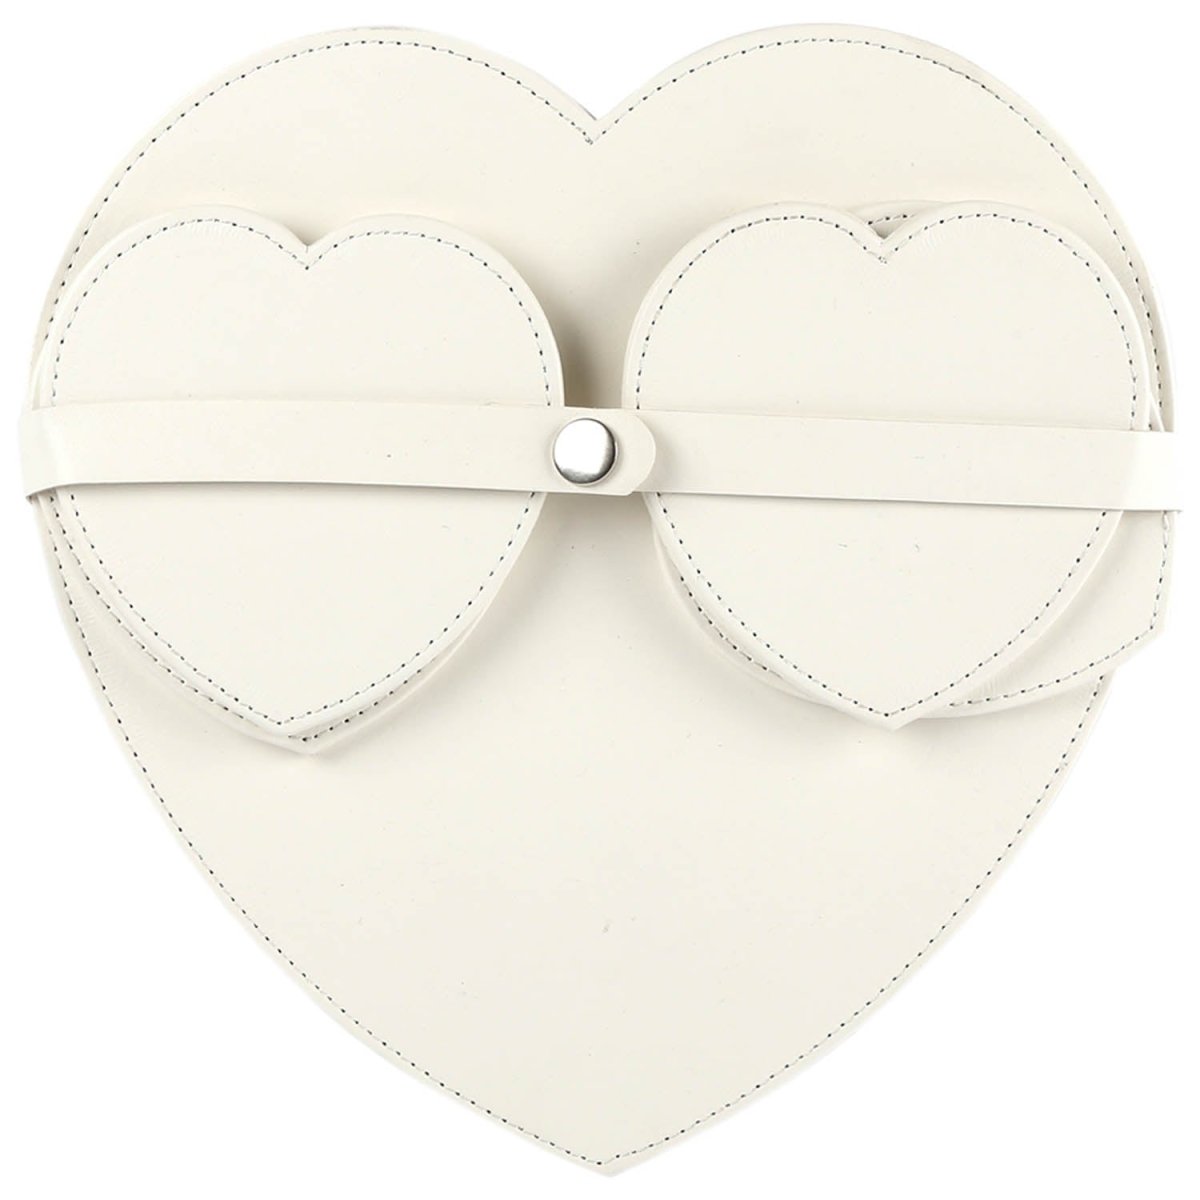 Set of 4 Heart Shaped Coasters Placemats White - Bonnypack